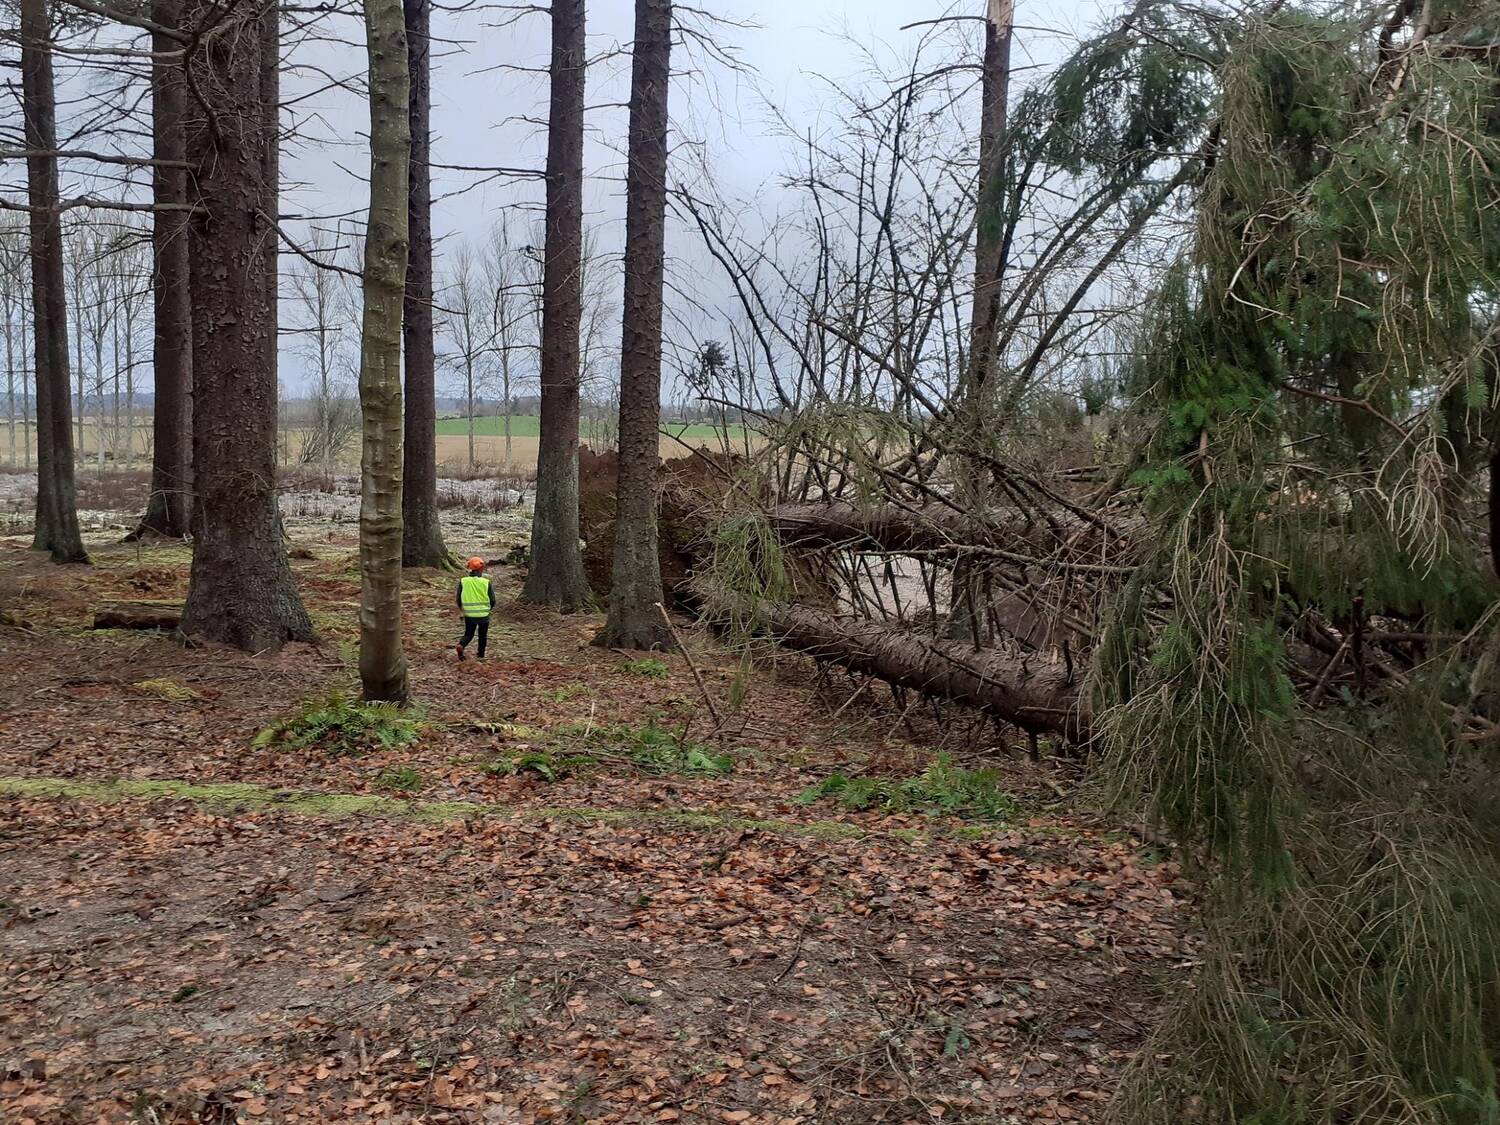 A large conifer tree has fallen in a woodland, lying across the ground. A person in a high-vis jacket stands near the tree and looks tiny in comparison.